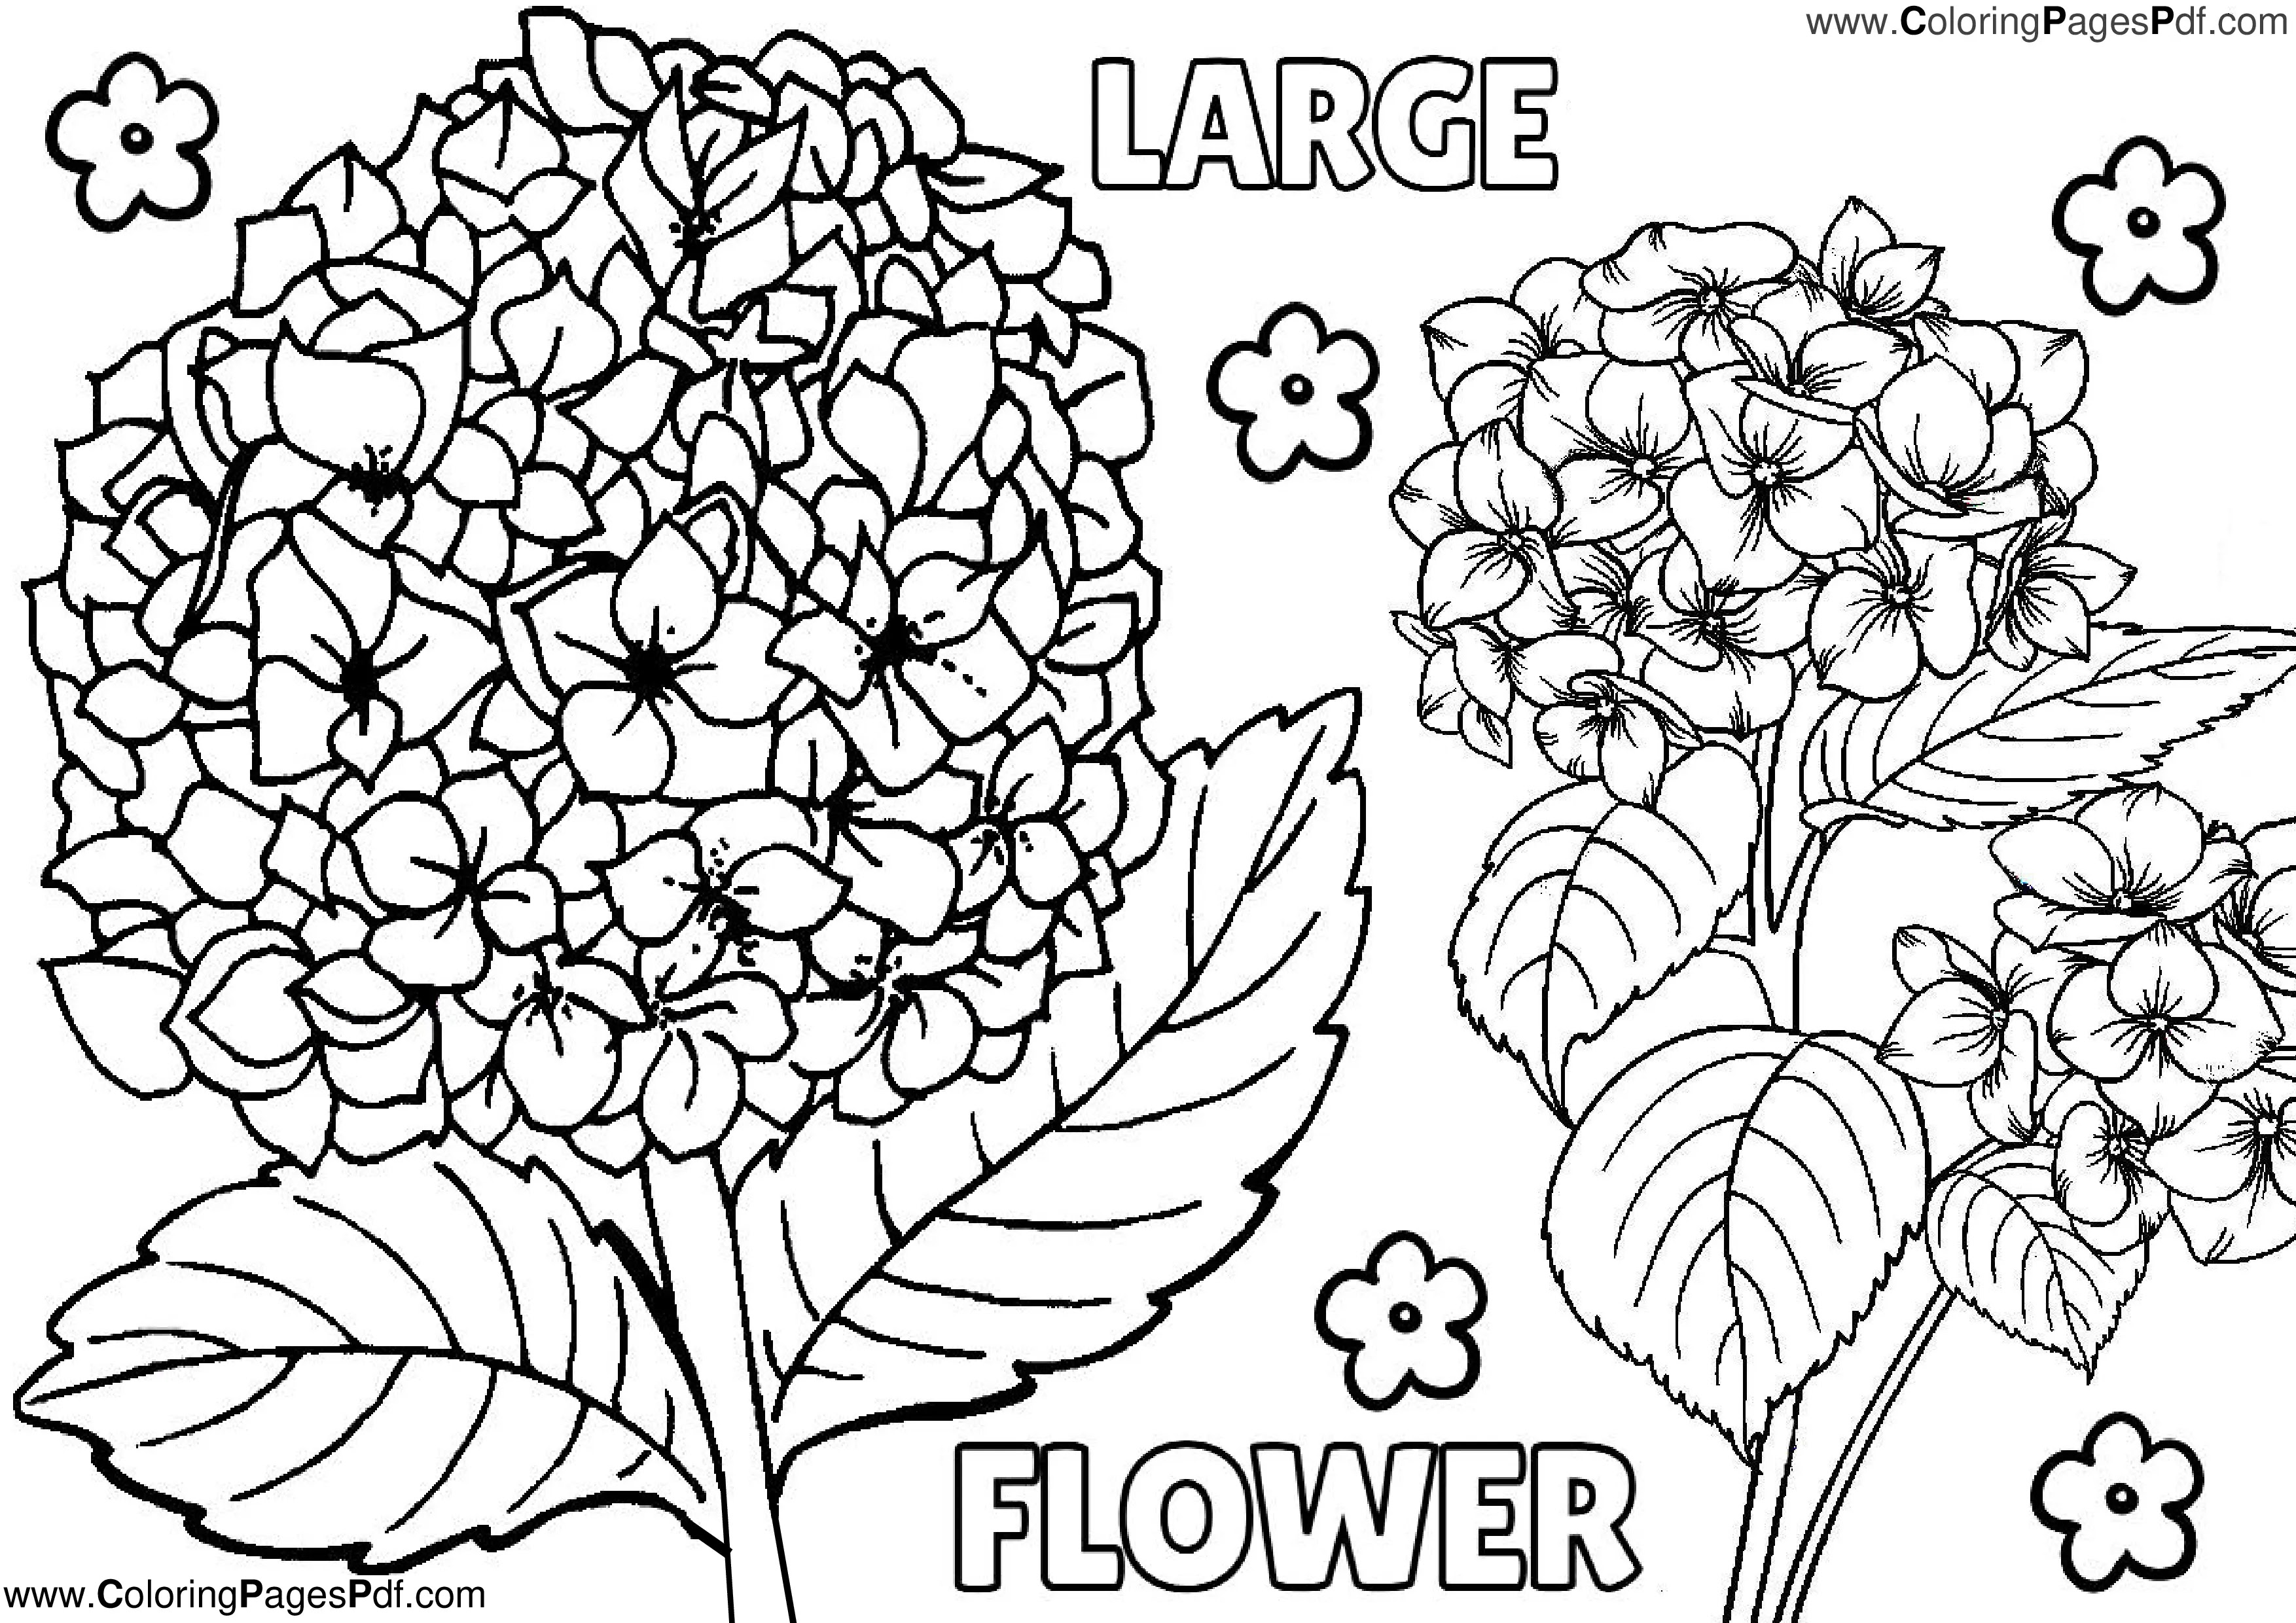 Large Flower coloring Pages